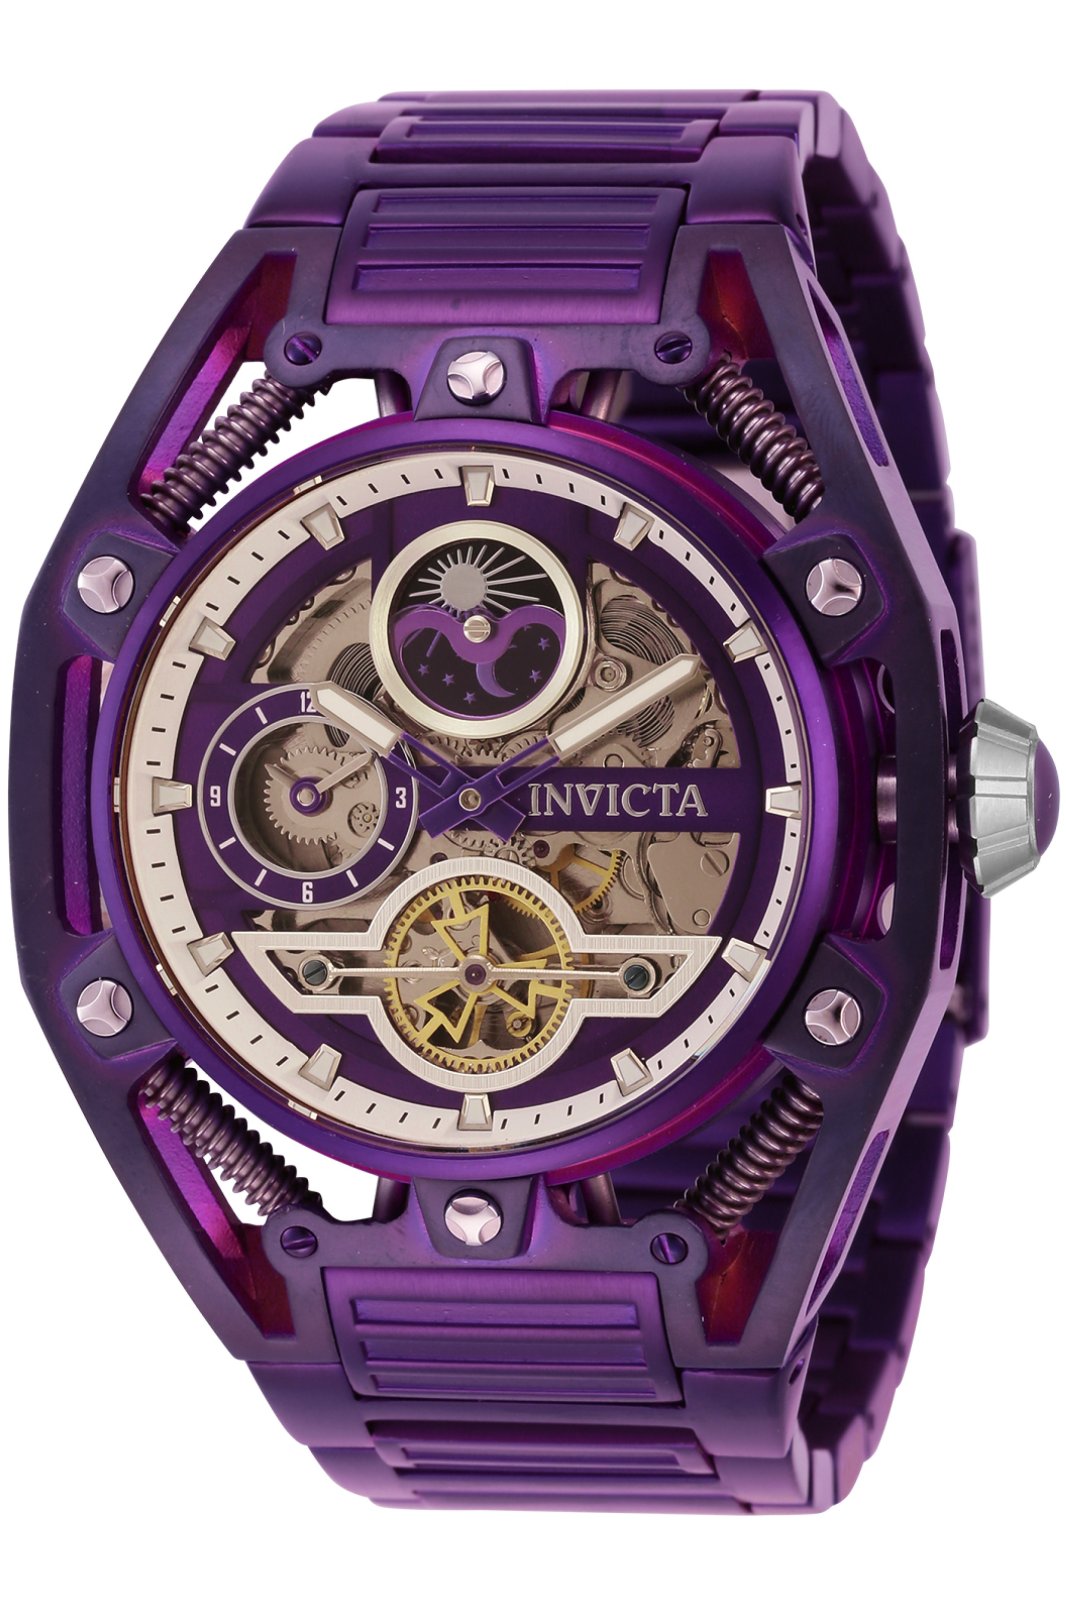 Invicta S1 Rally 42134 Men's Automatic Watch - 52mm